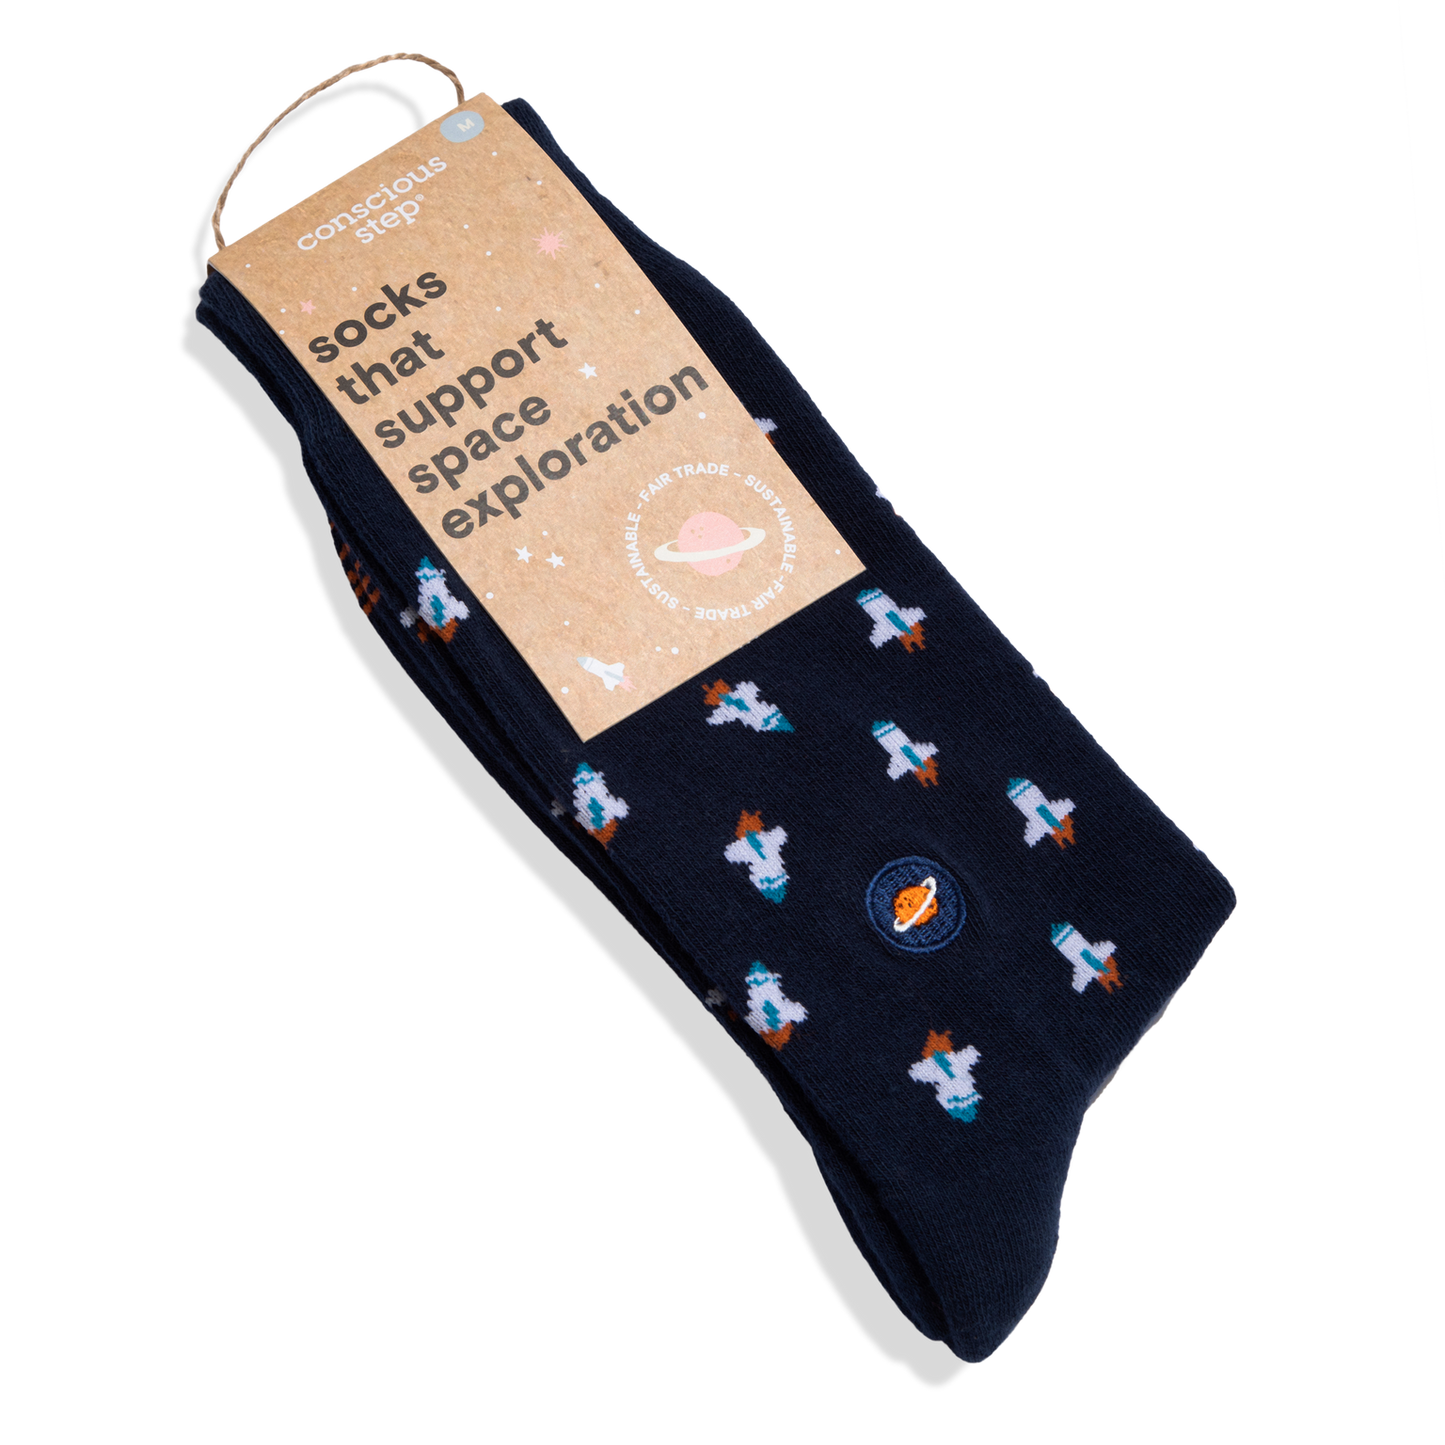 Socks that Support Space Exploration (Navy Rocket Ships): Small